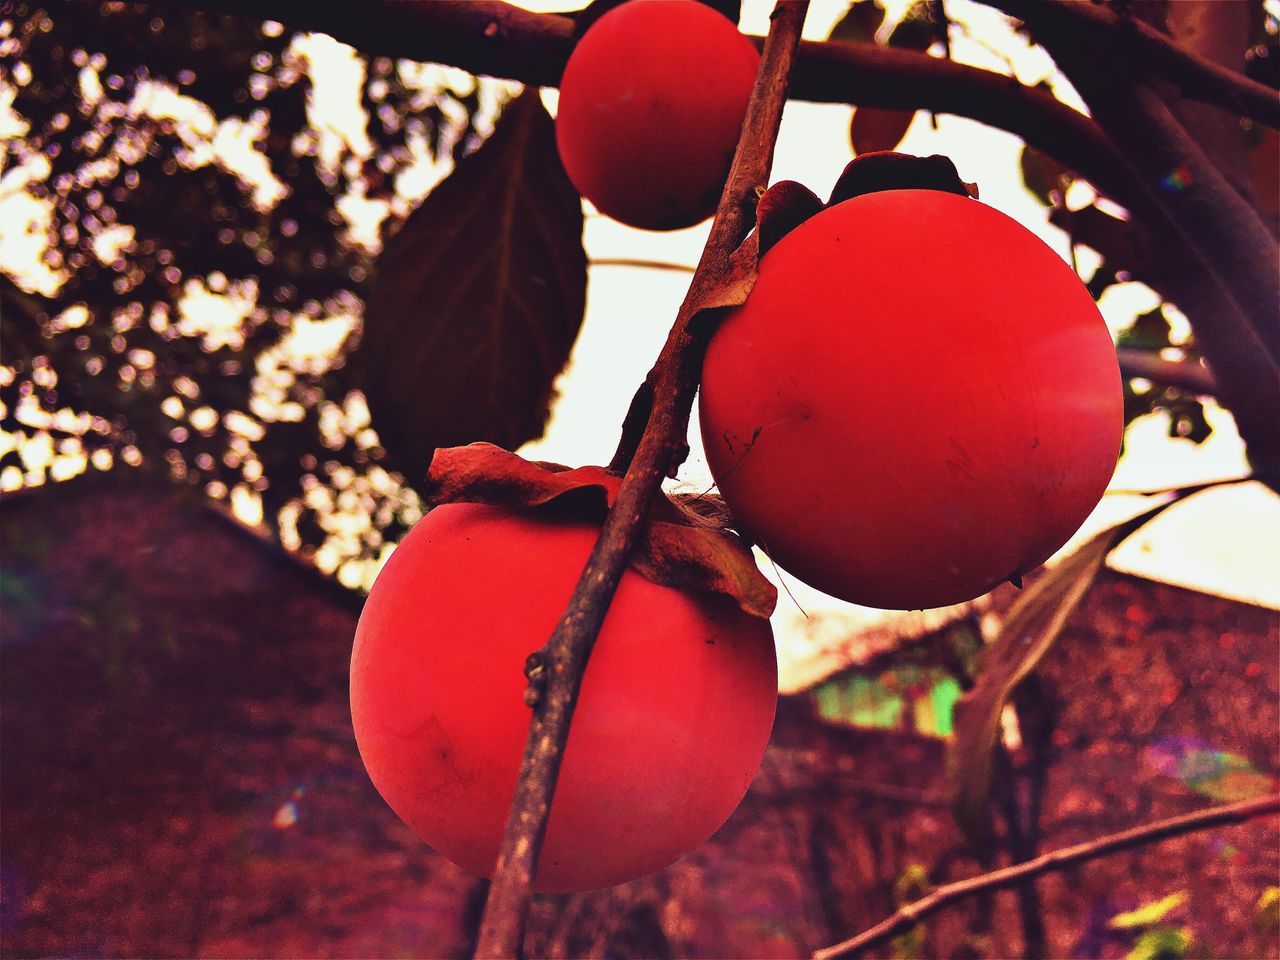 red, food and drink, fruit, healthy eating, food, freshness, close-up, hanging, day, rose hip, no people, persimmon, outdoors, tree